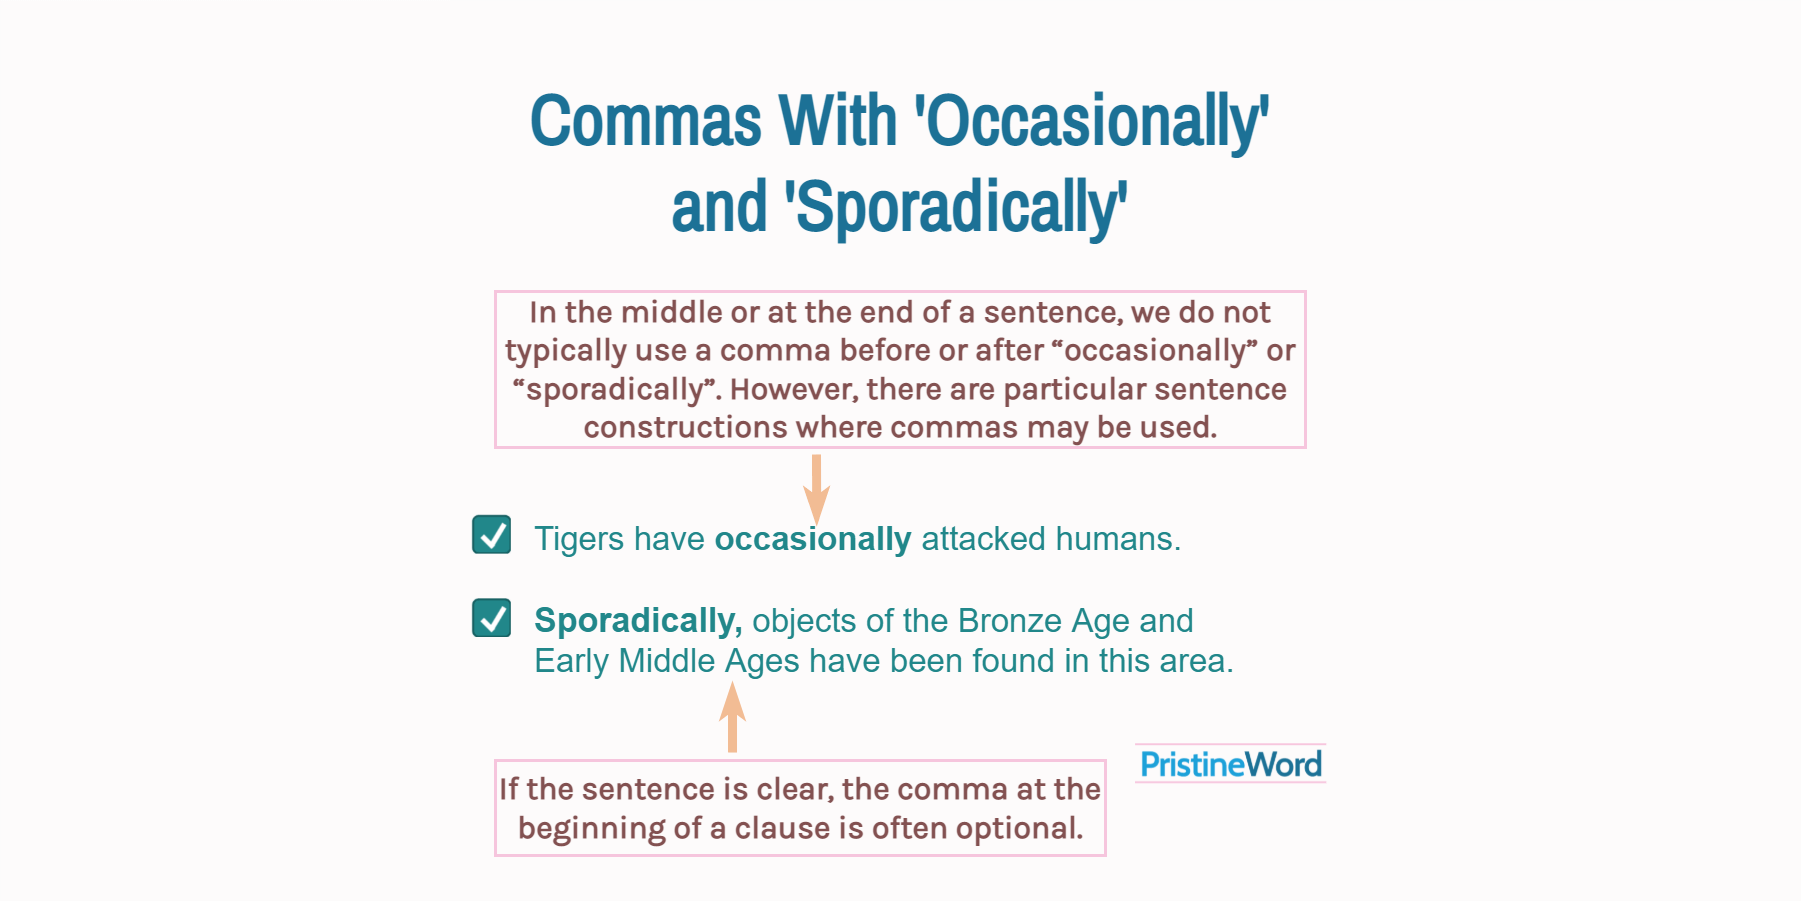 Commas With 'Occasionally' and 'Sporadically'